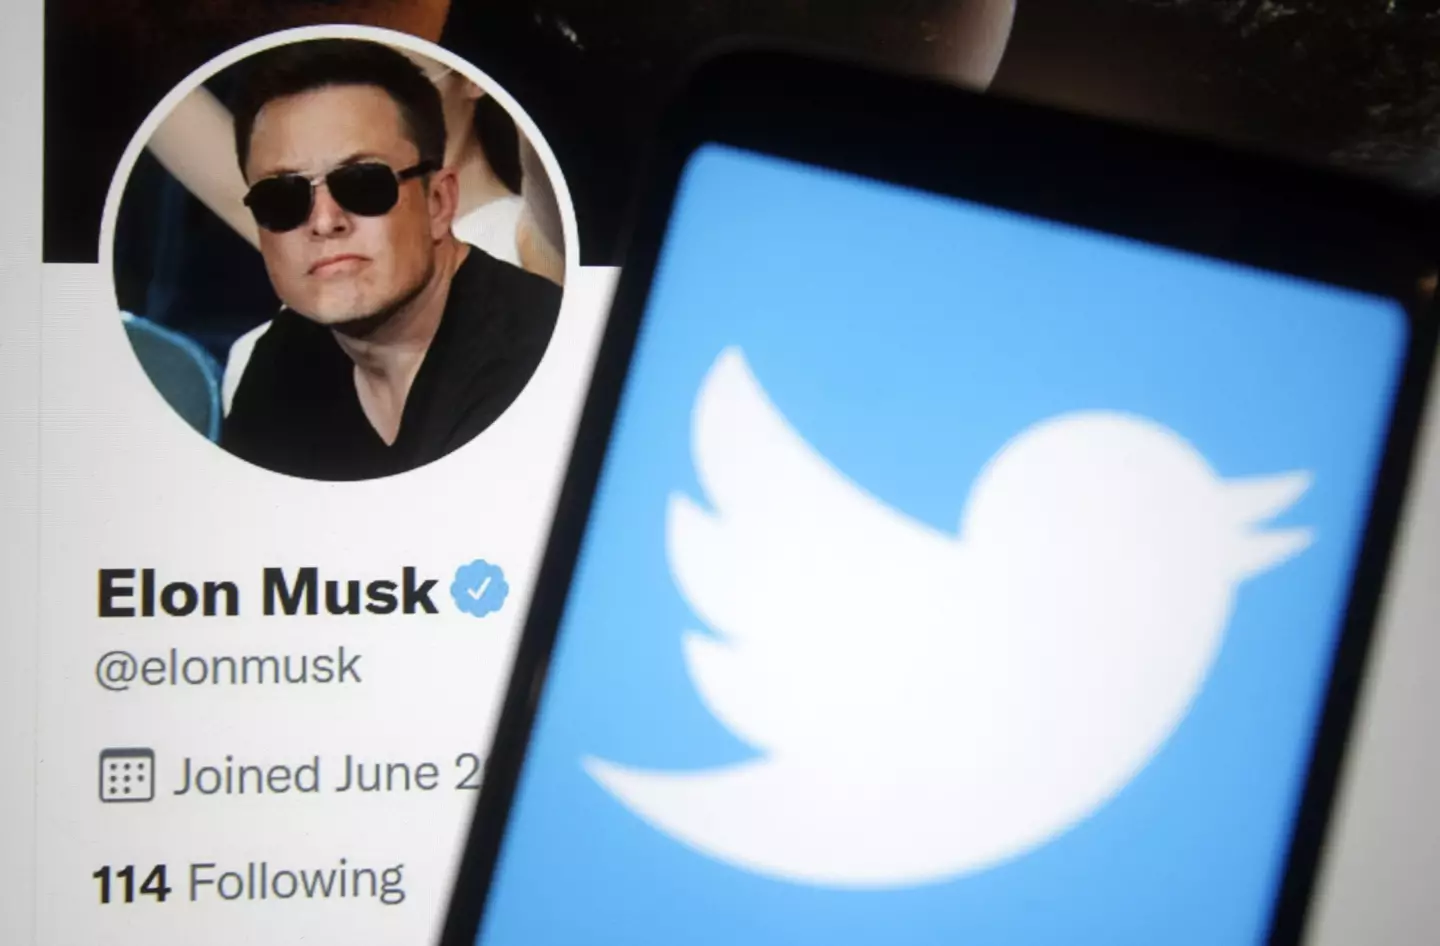 Musk is the new head of Twitter.